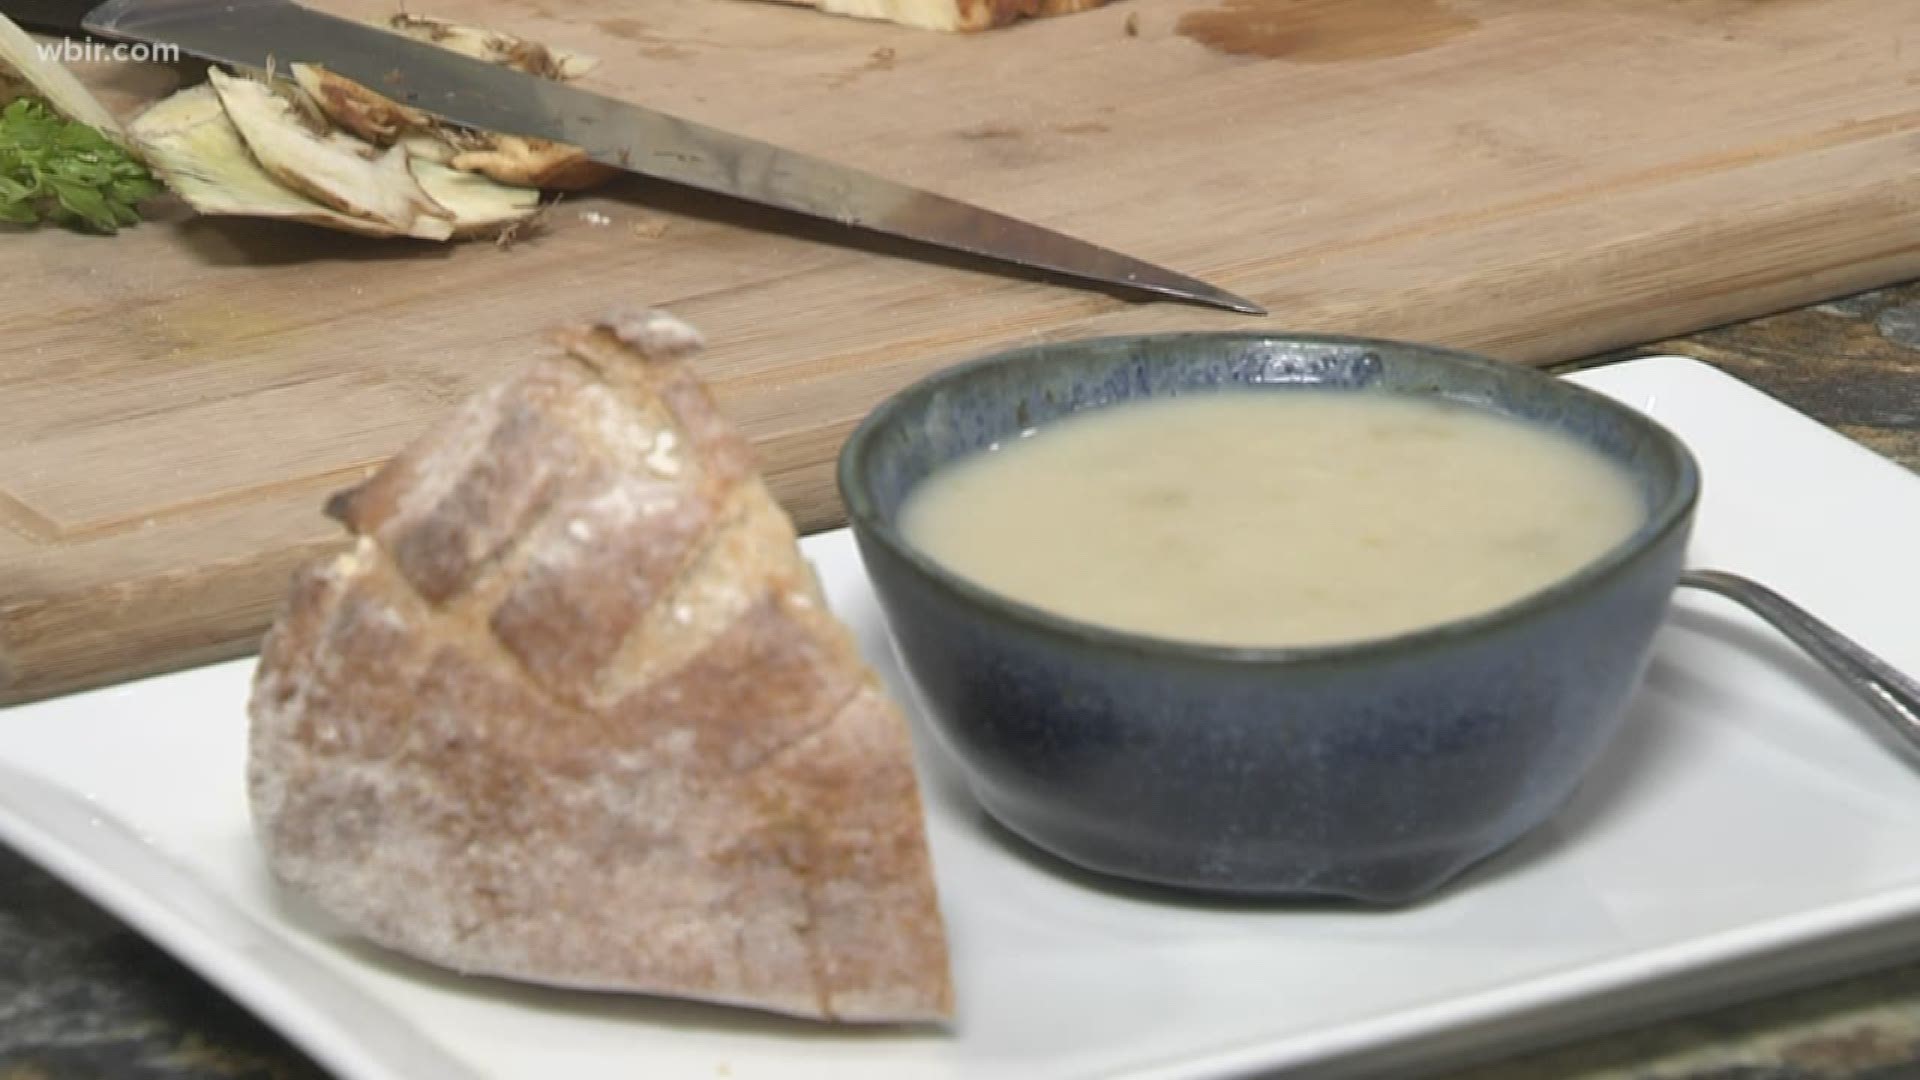 Mahasti Vafaie from the Tomato Head joins us in the kitchen to make a healthy soup for your New Year's resolution.